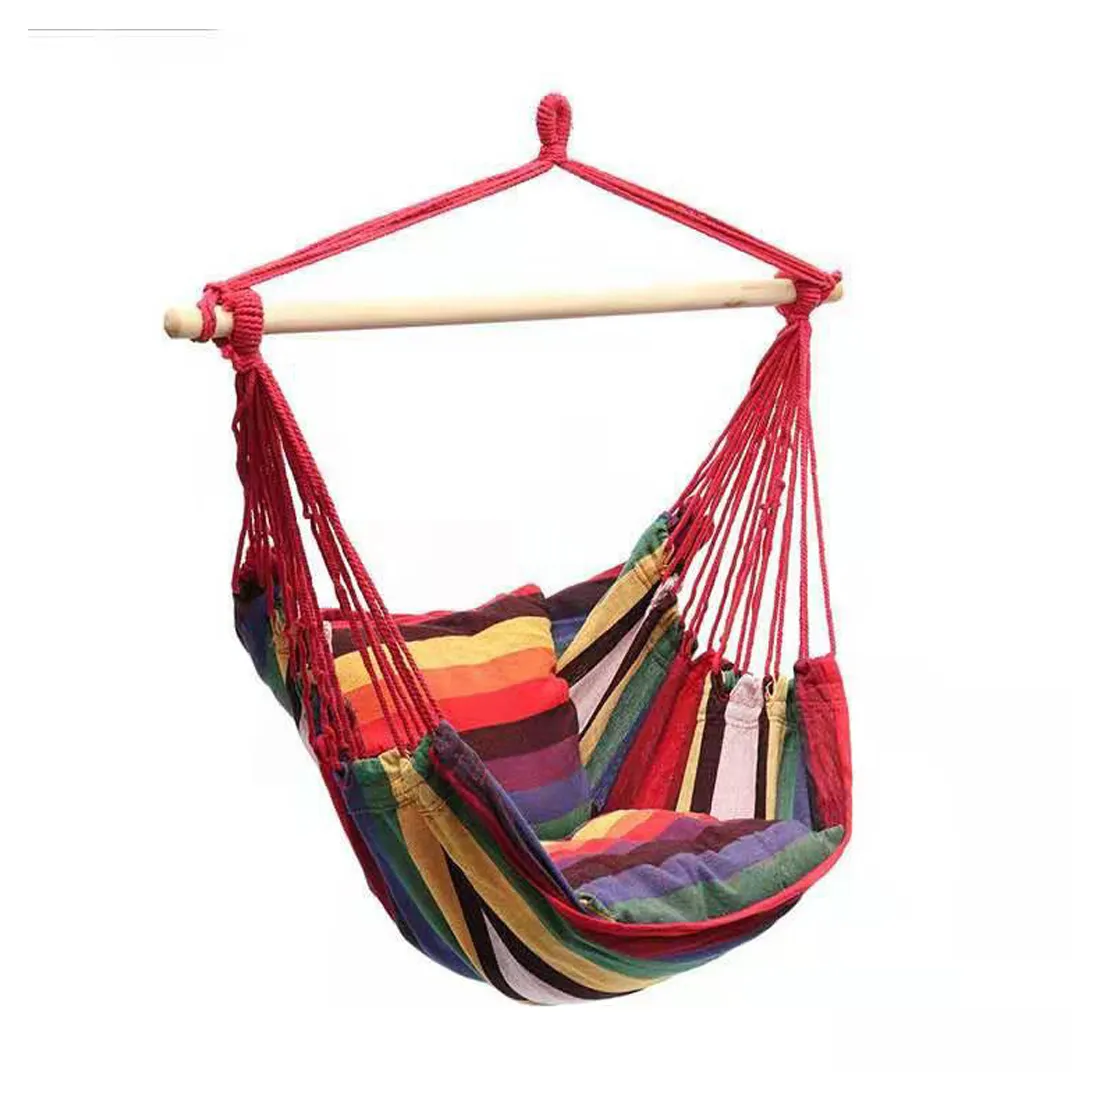 Outdoor folding garden swing set chairs suspended hanging canvas hammock chair for kids swing-max rocking Double